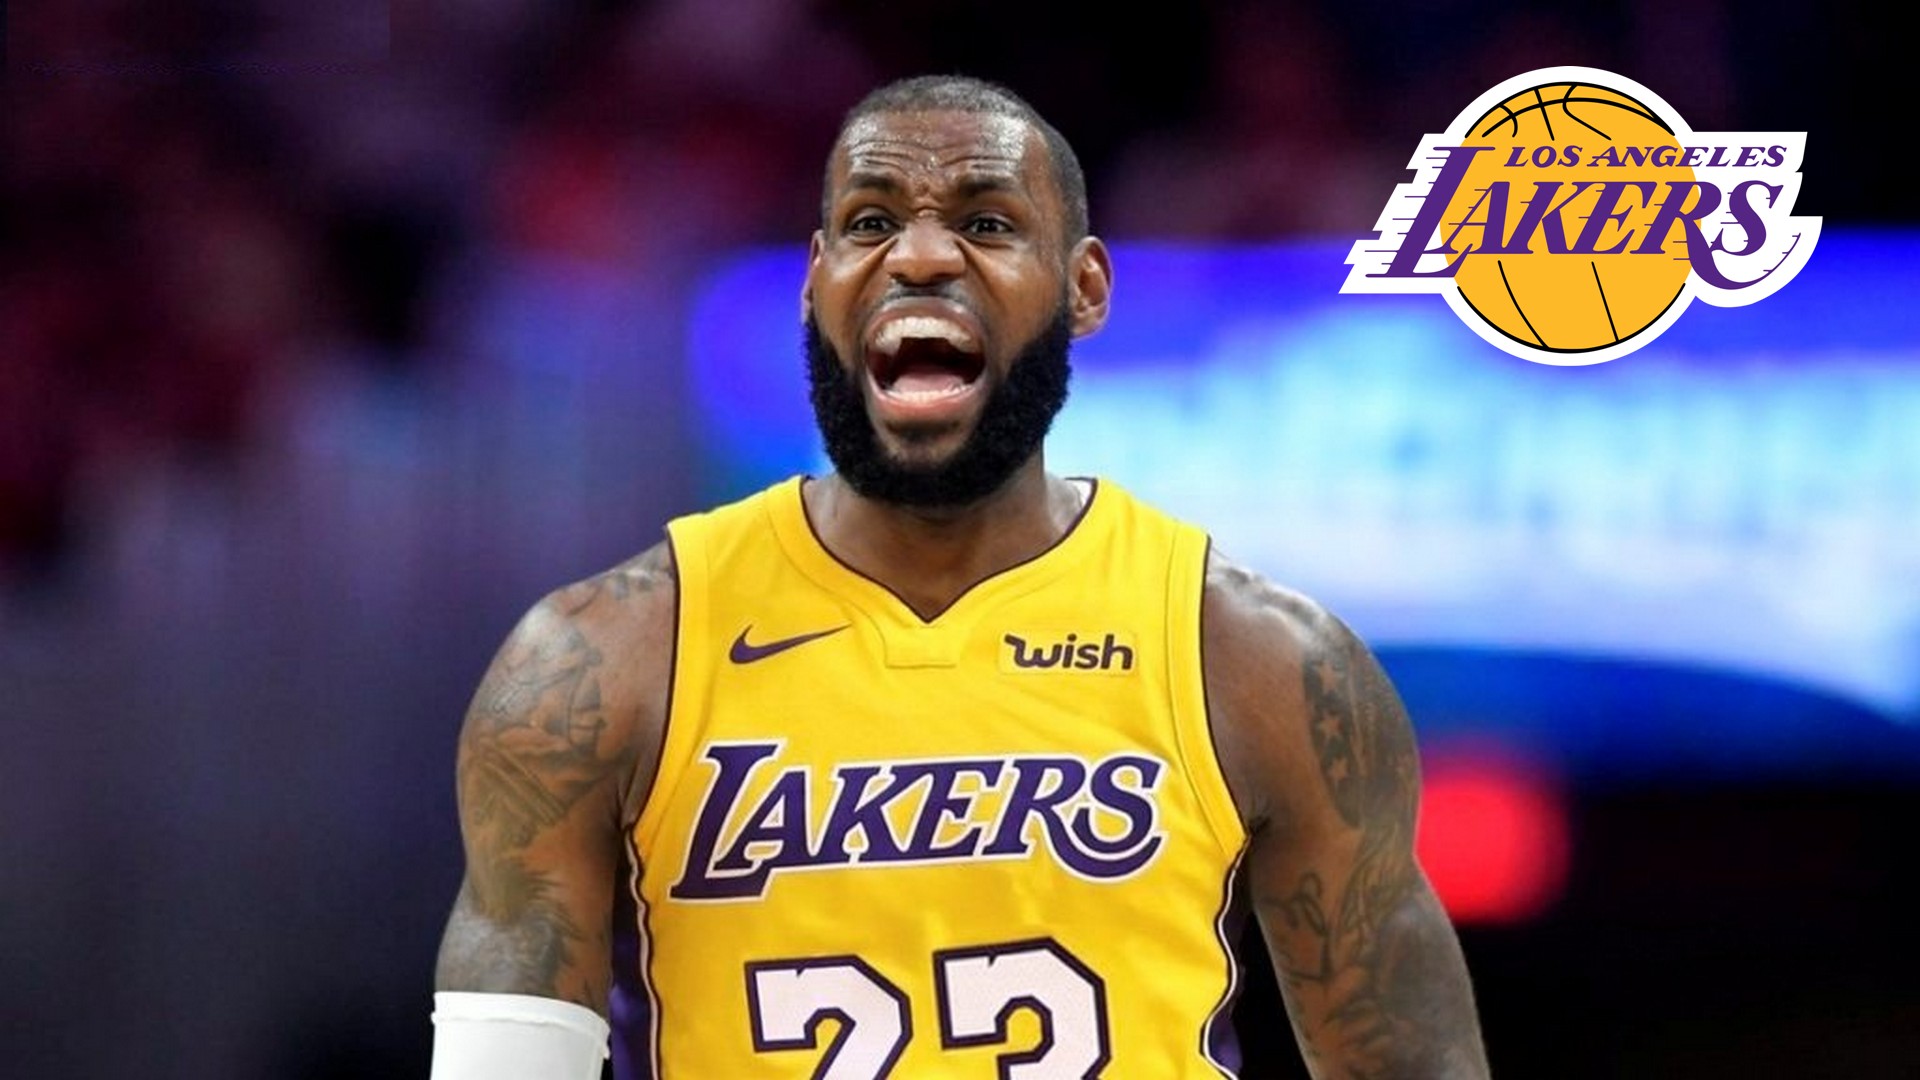 Wallpaper Desktop LeBron James Lakers Jersey HD with image dimensions 1920x1080 pixel. You can make this wallpaper for your Desktop Computer Backgrounds, Windows or Mac Screensavers, iPhone Lock screen, Tablet or Android and another Mobile Phone device